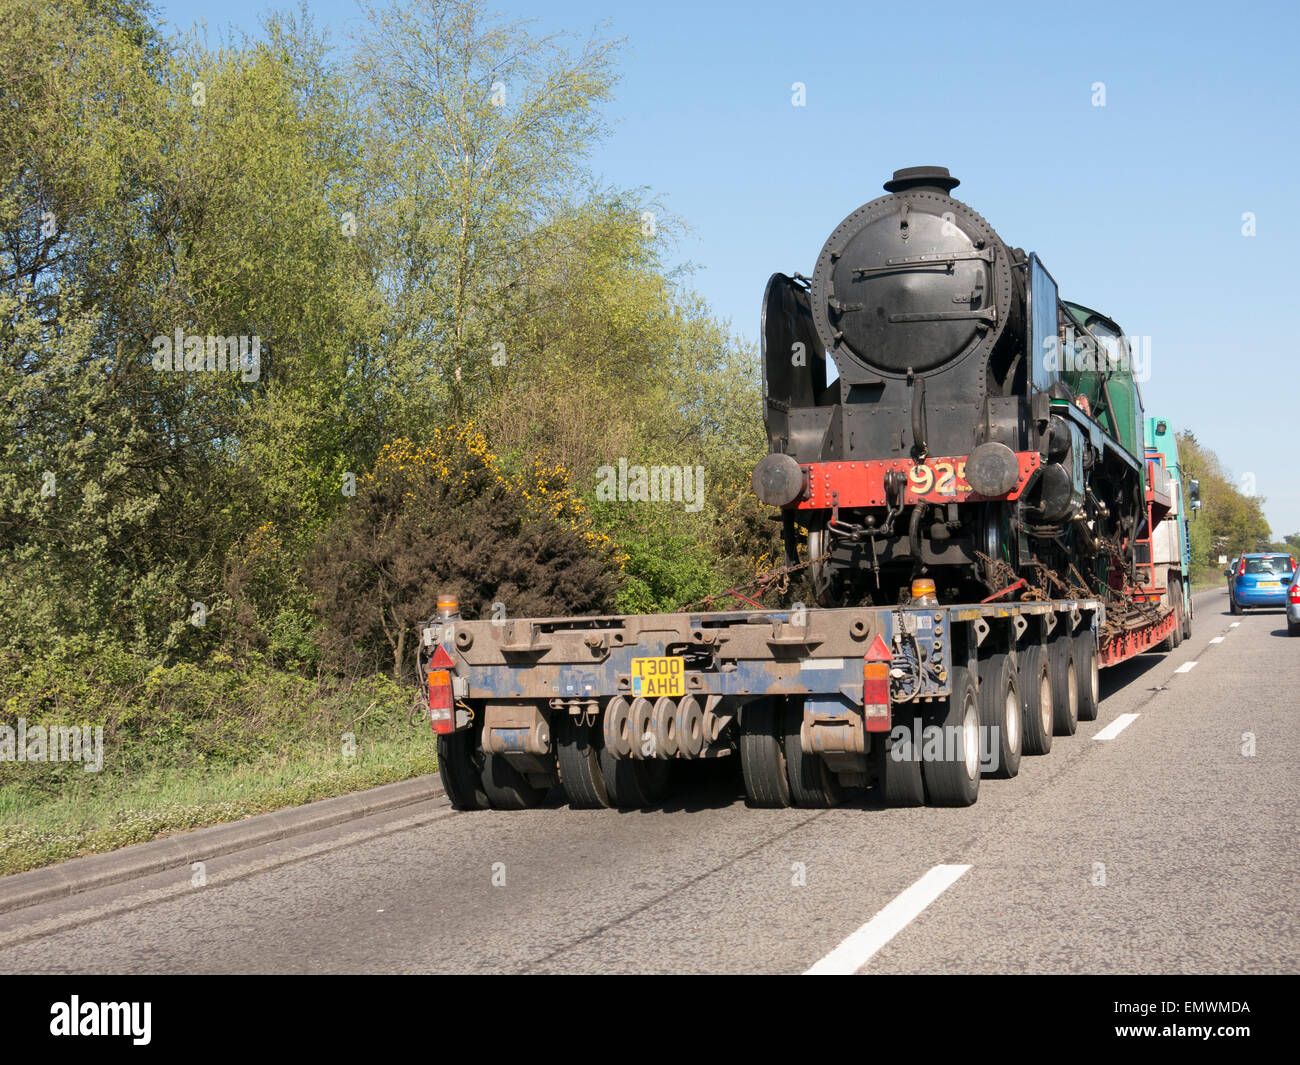 Locomotive steam train being transported by road 2015 Stock Photo